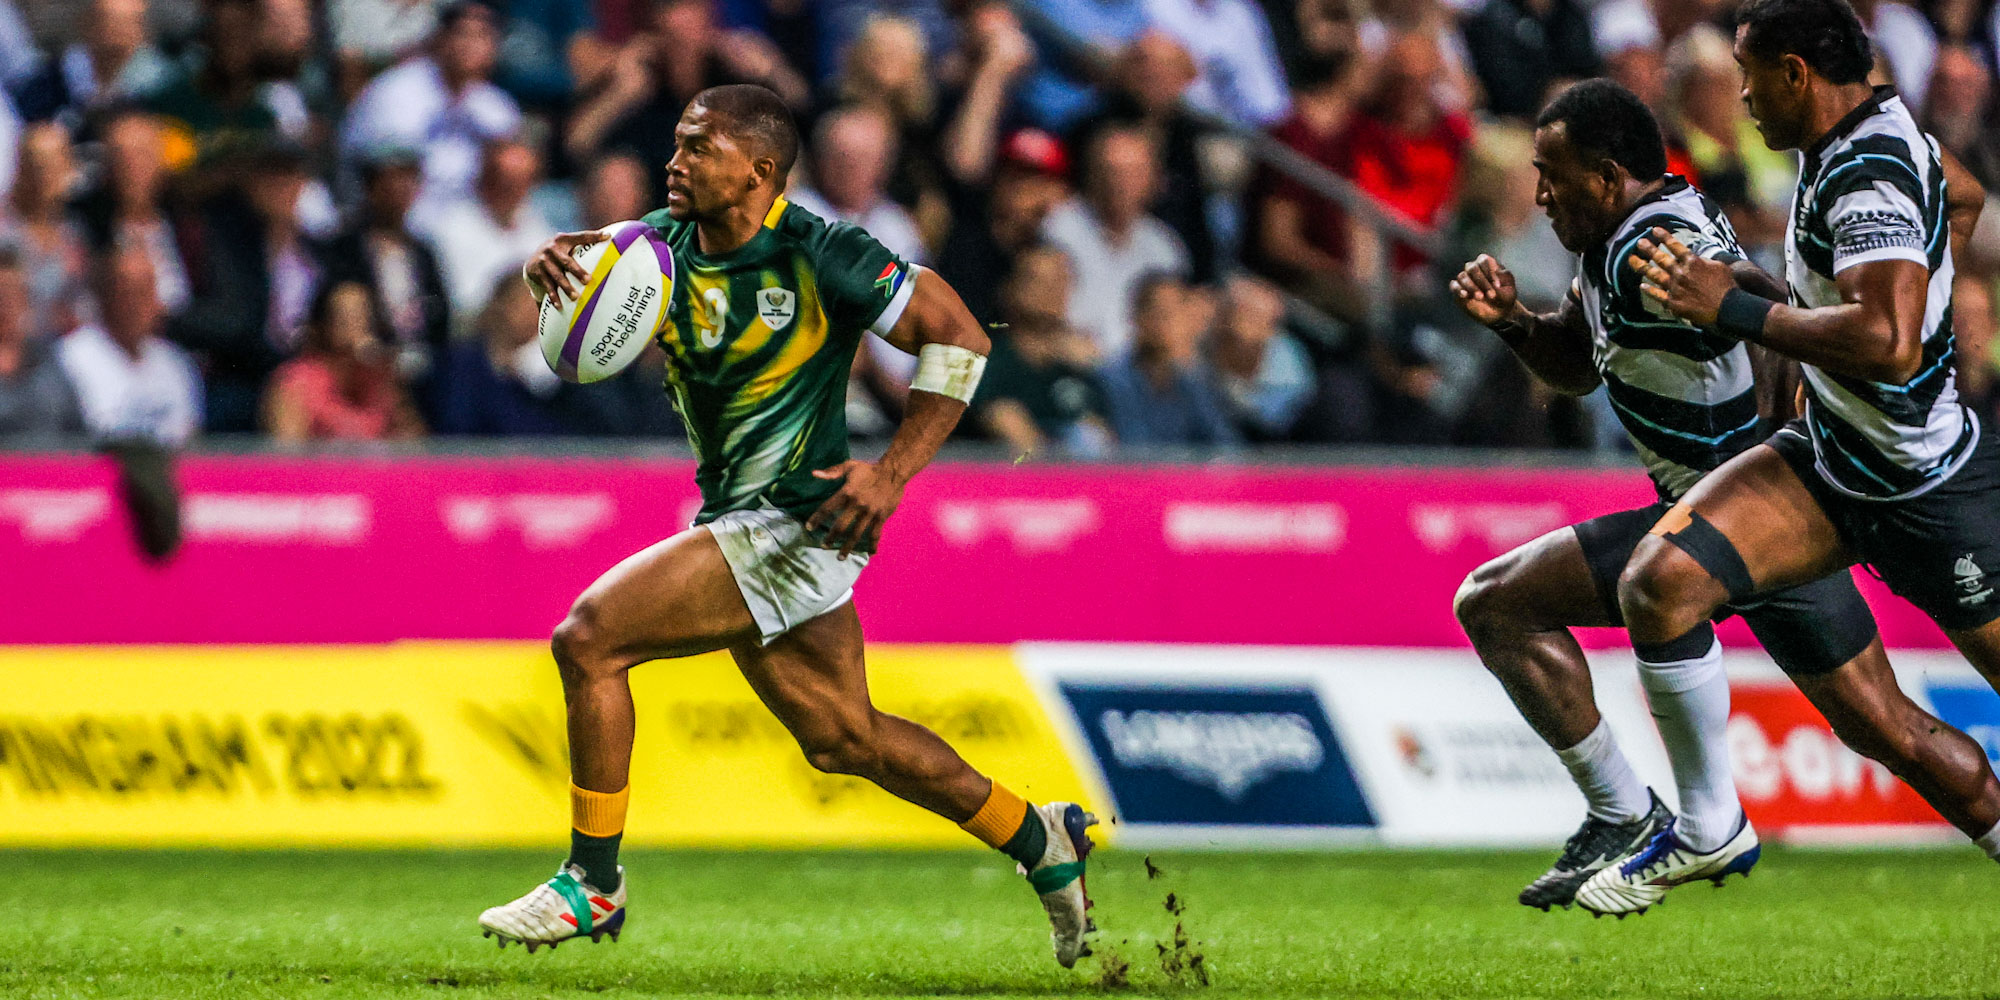 Catch me if you can: Shaun Williams outstrips the Fijian defence.